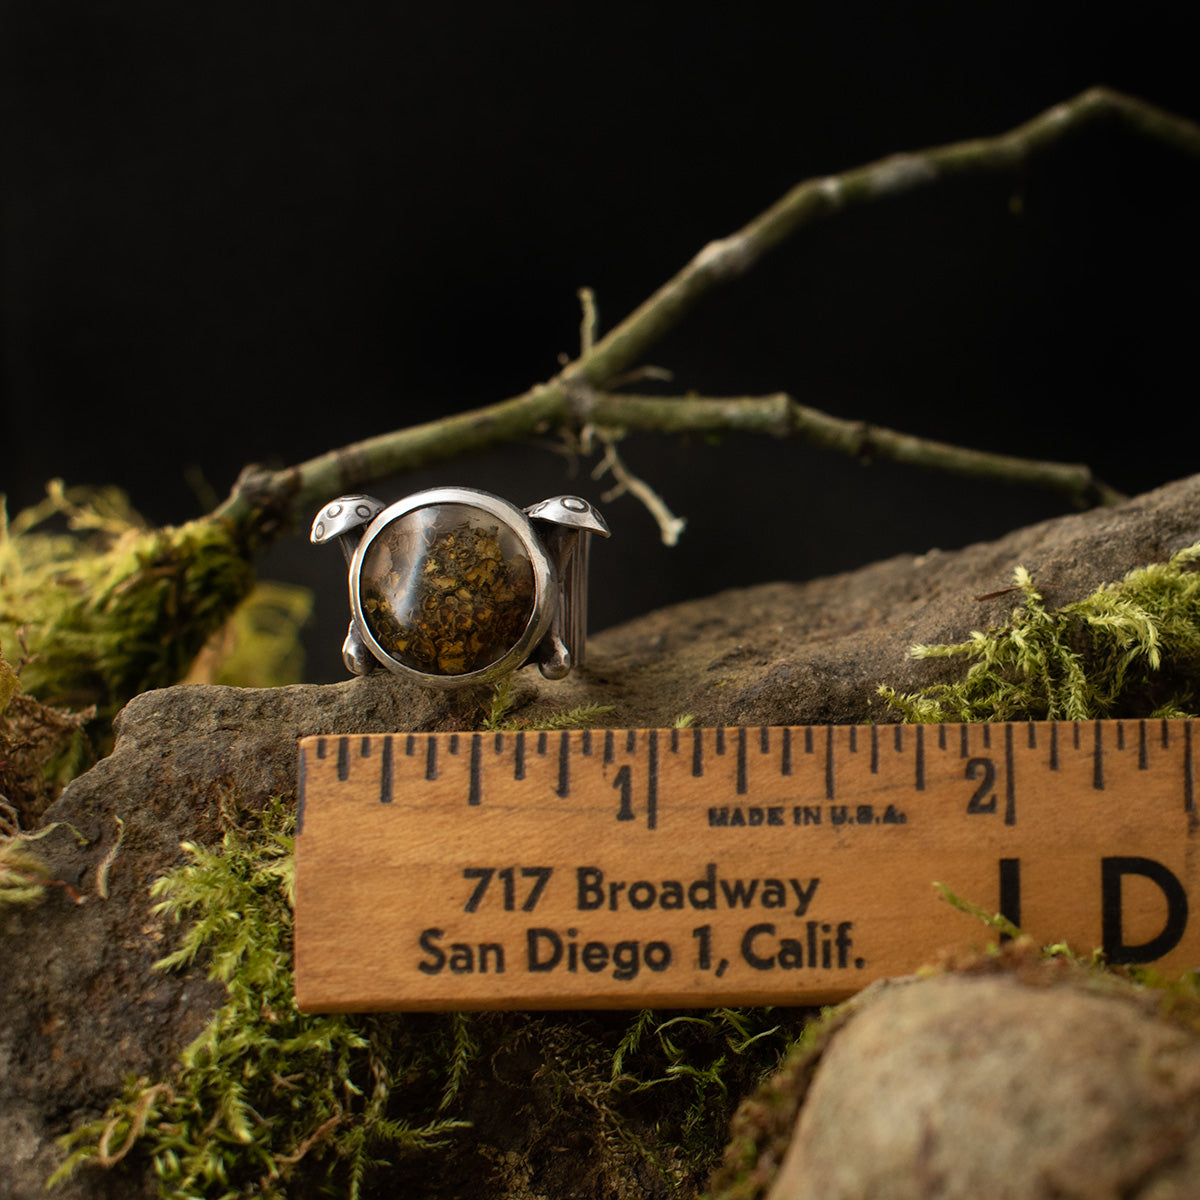 The Real Lichen Double Toadstool Ring with a ruler for scale, measuring around 1 inch wide overall.